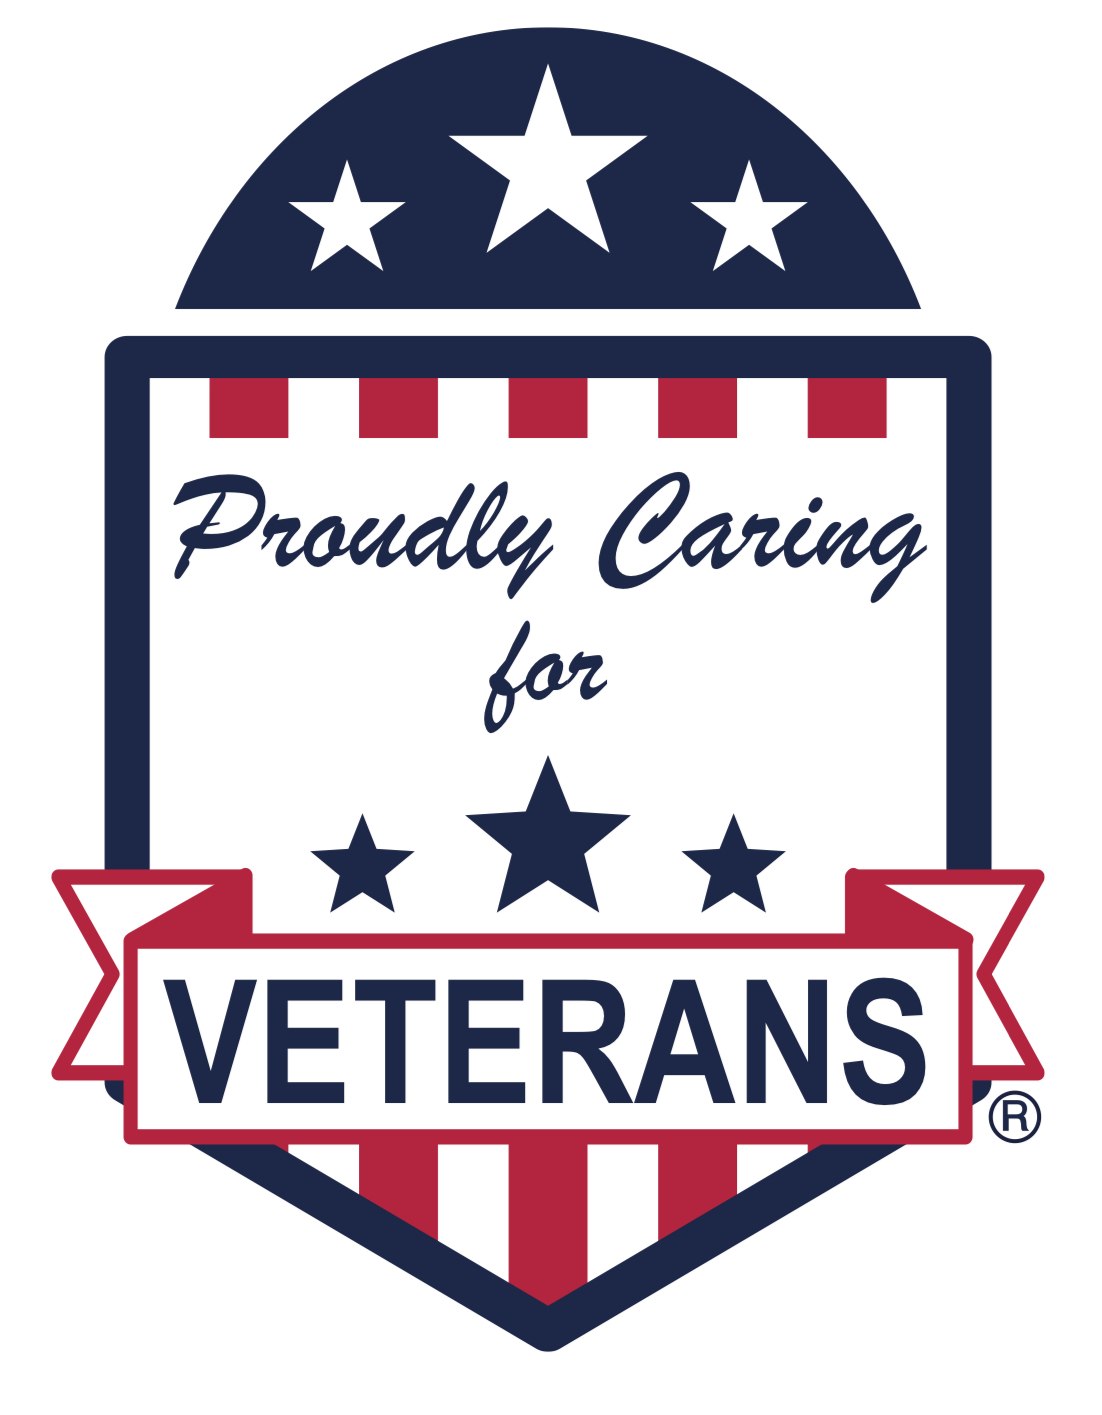 Veterans Administration Proudly Serving logo